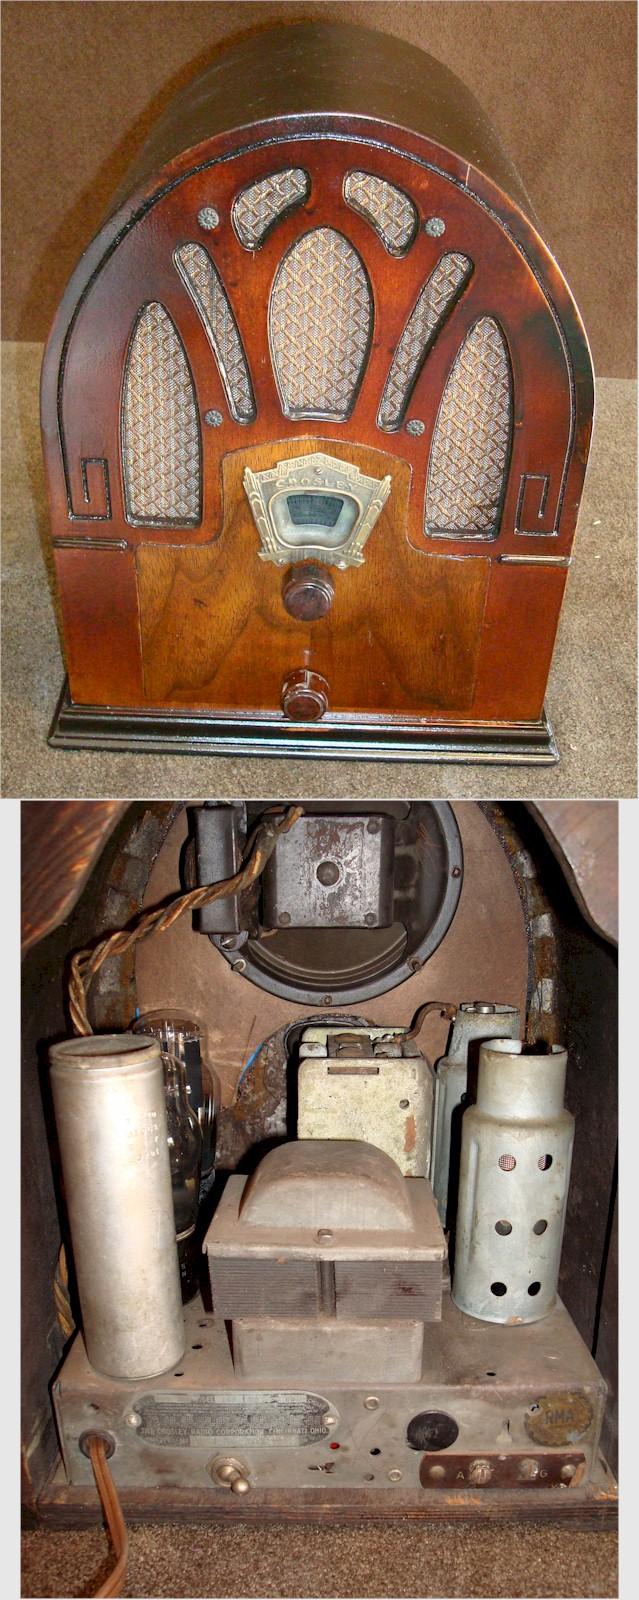 Crosley 179 "Dual Four" Cathedral (1934)